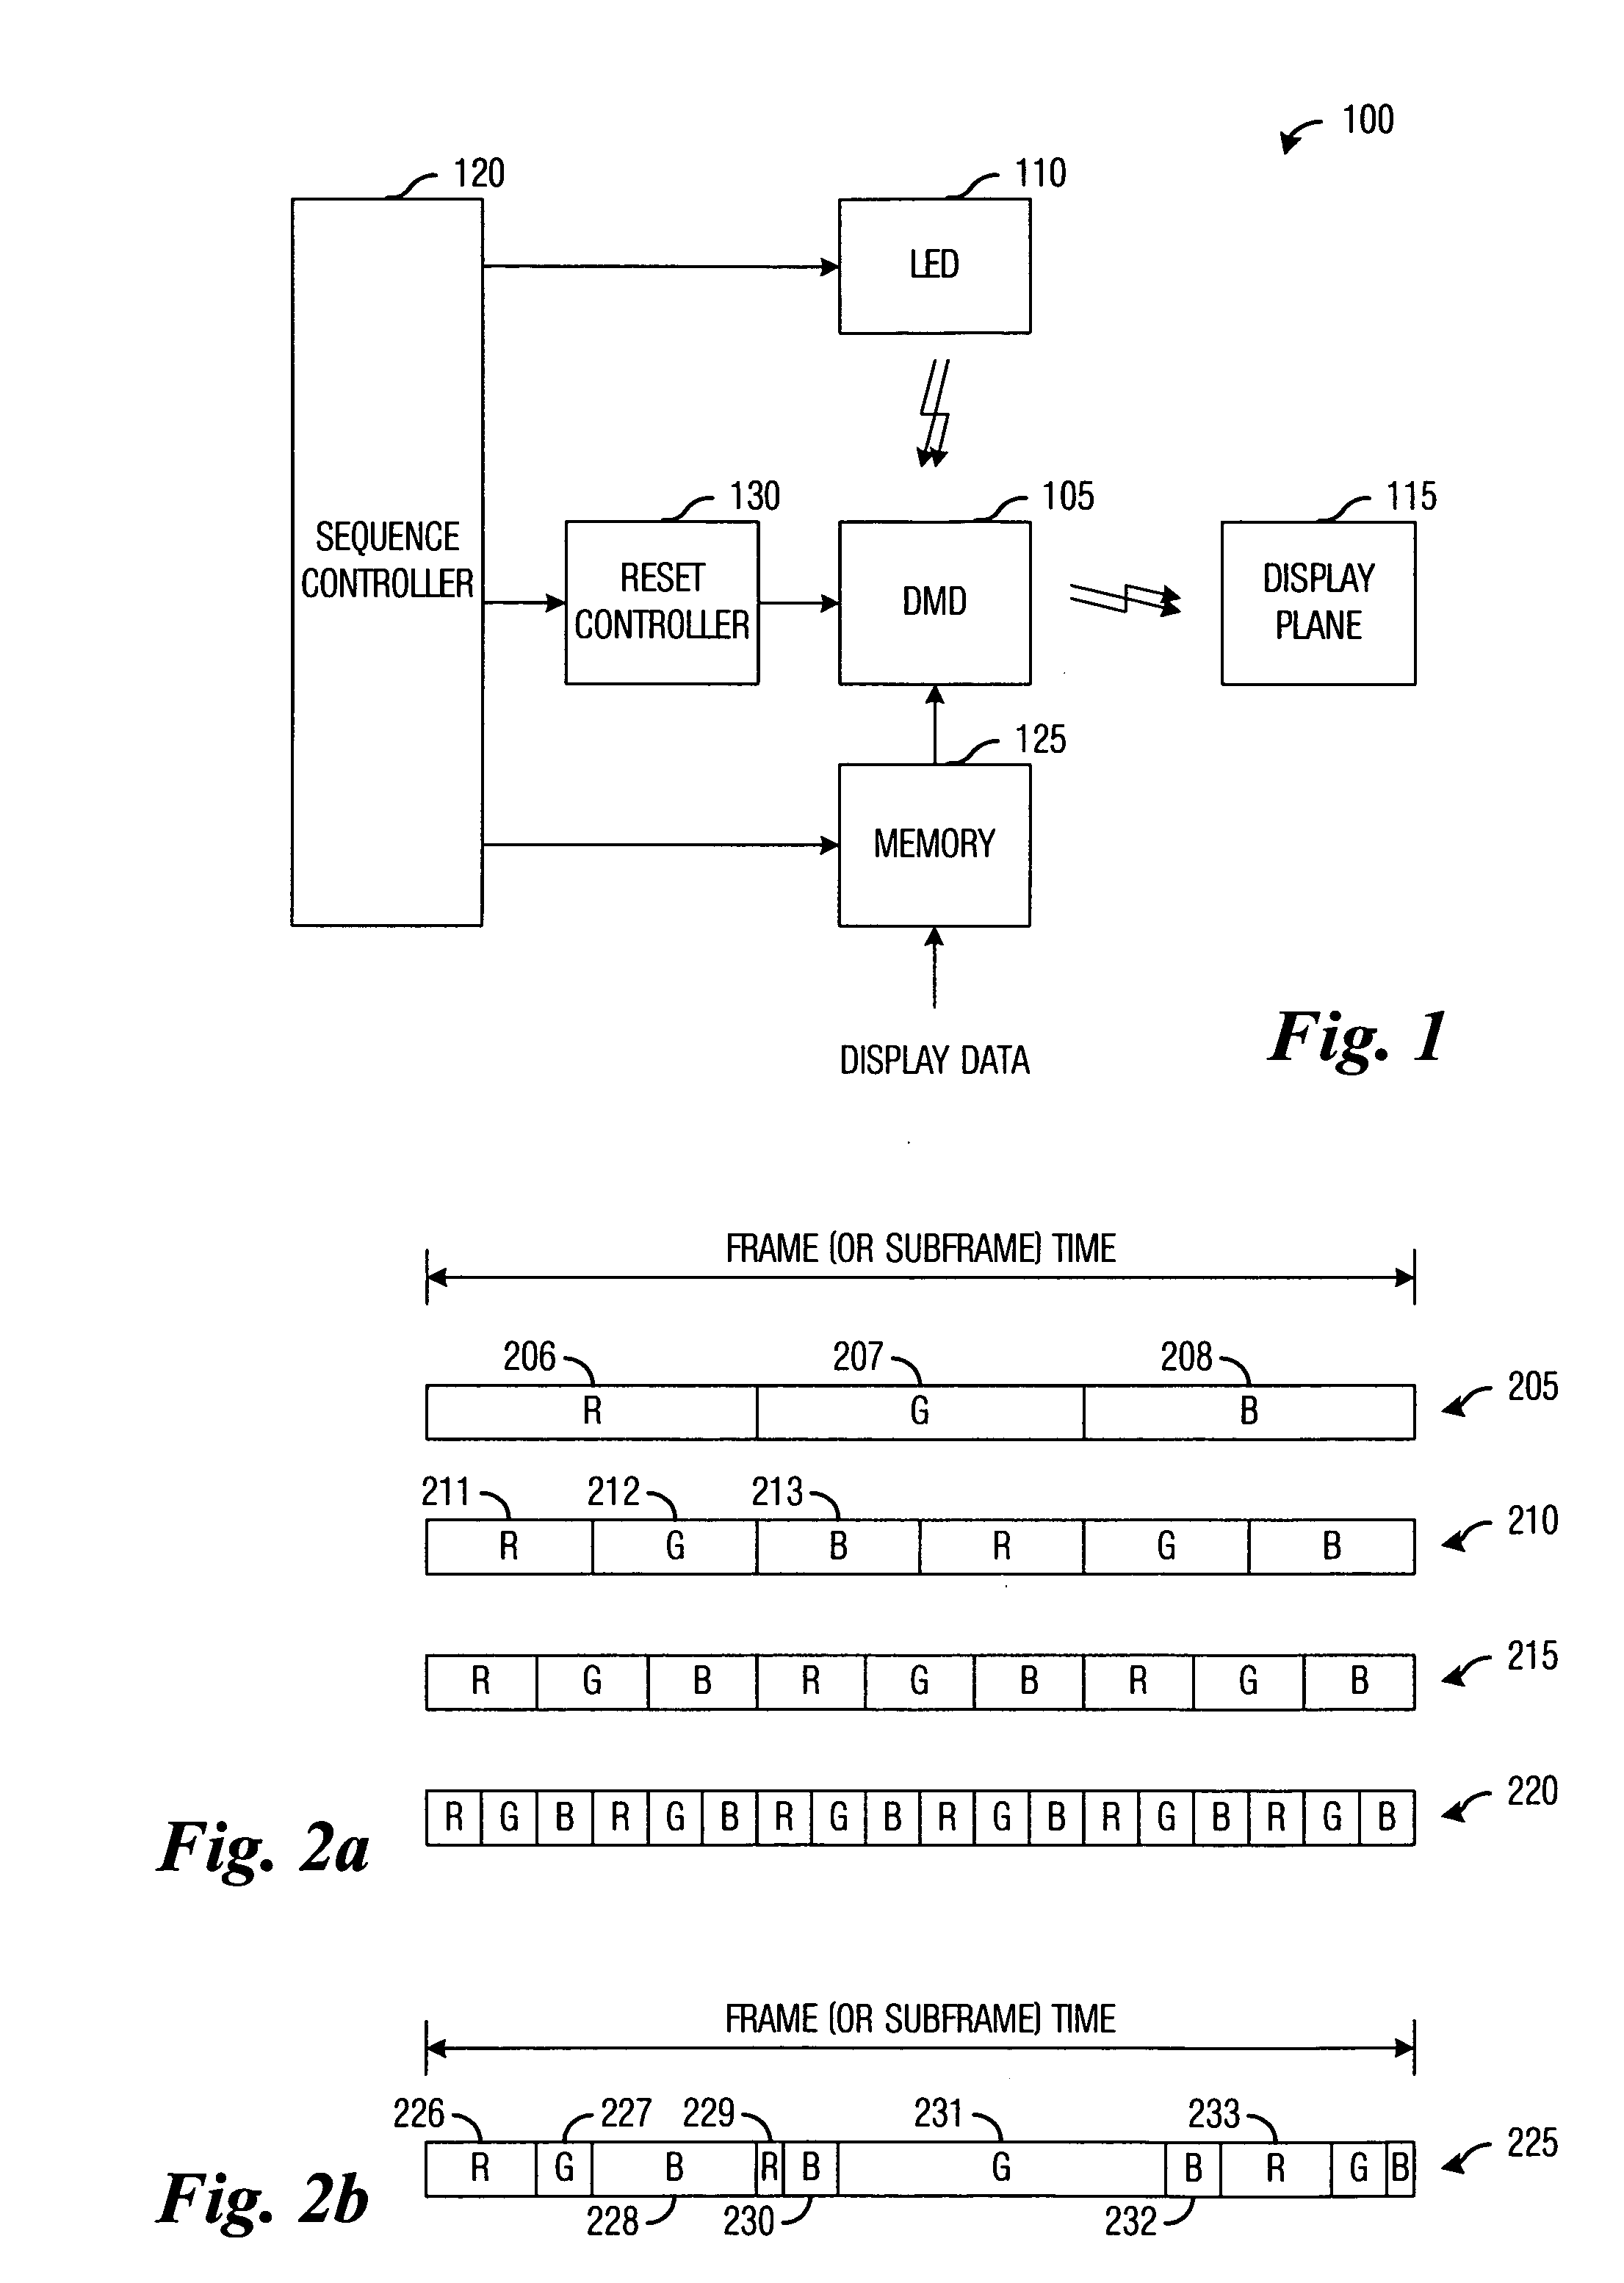 Sequence design in a display system